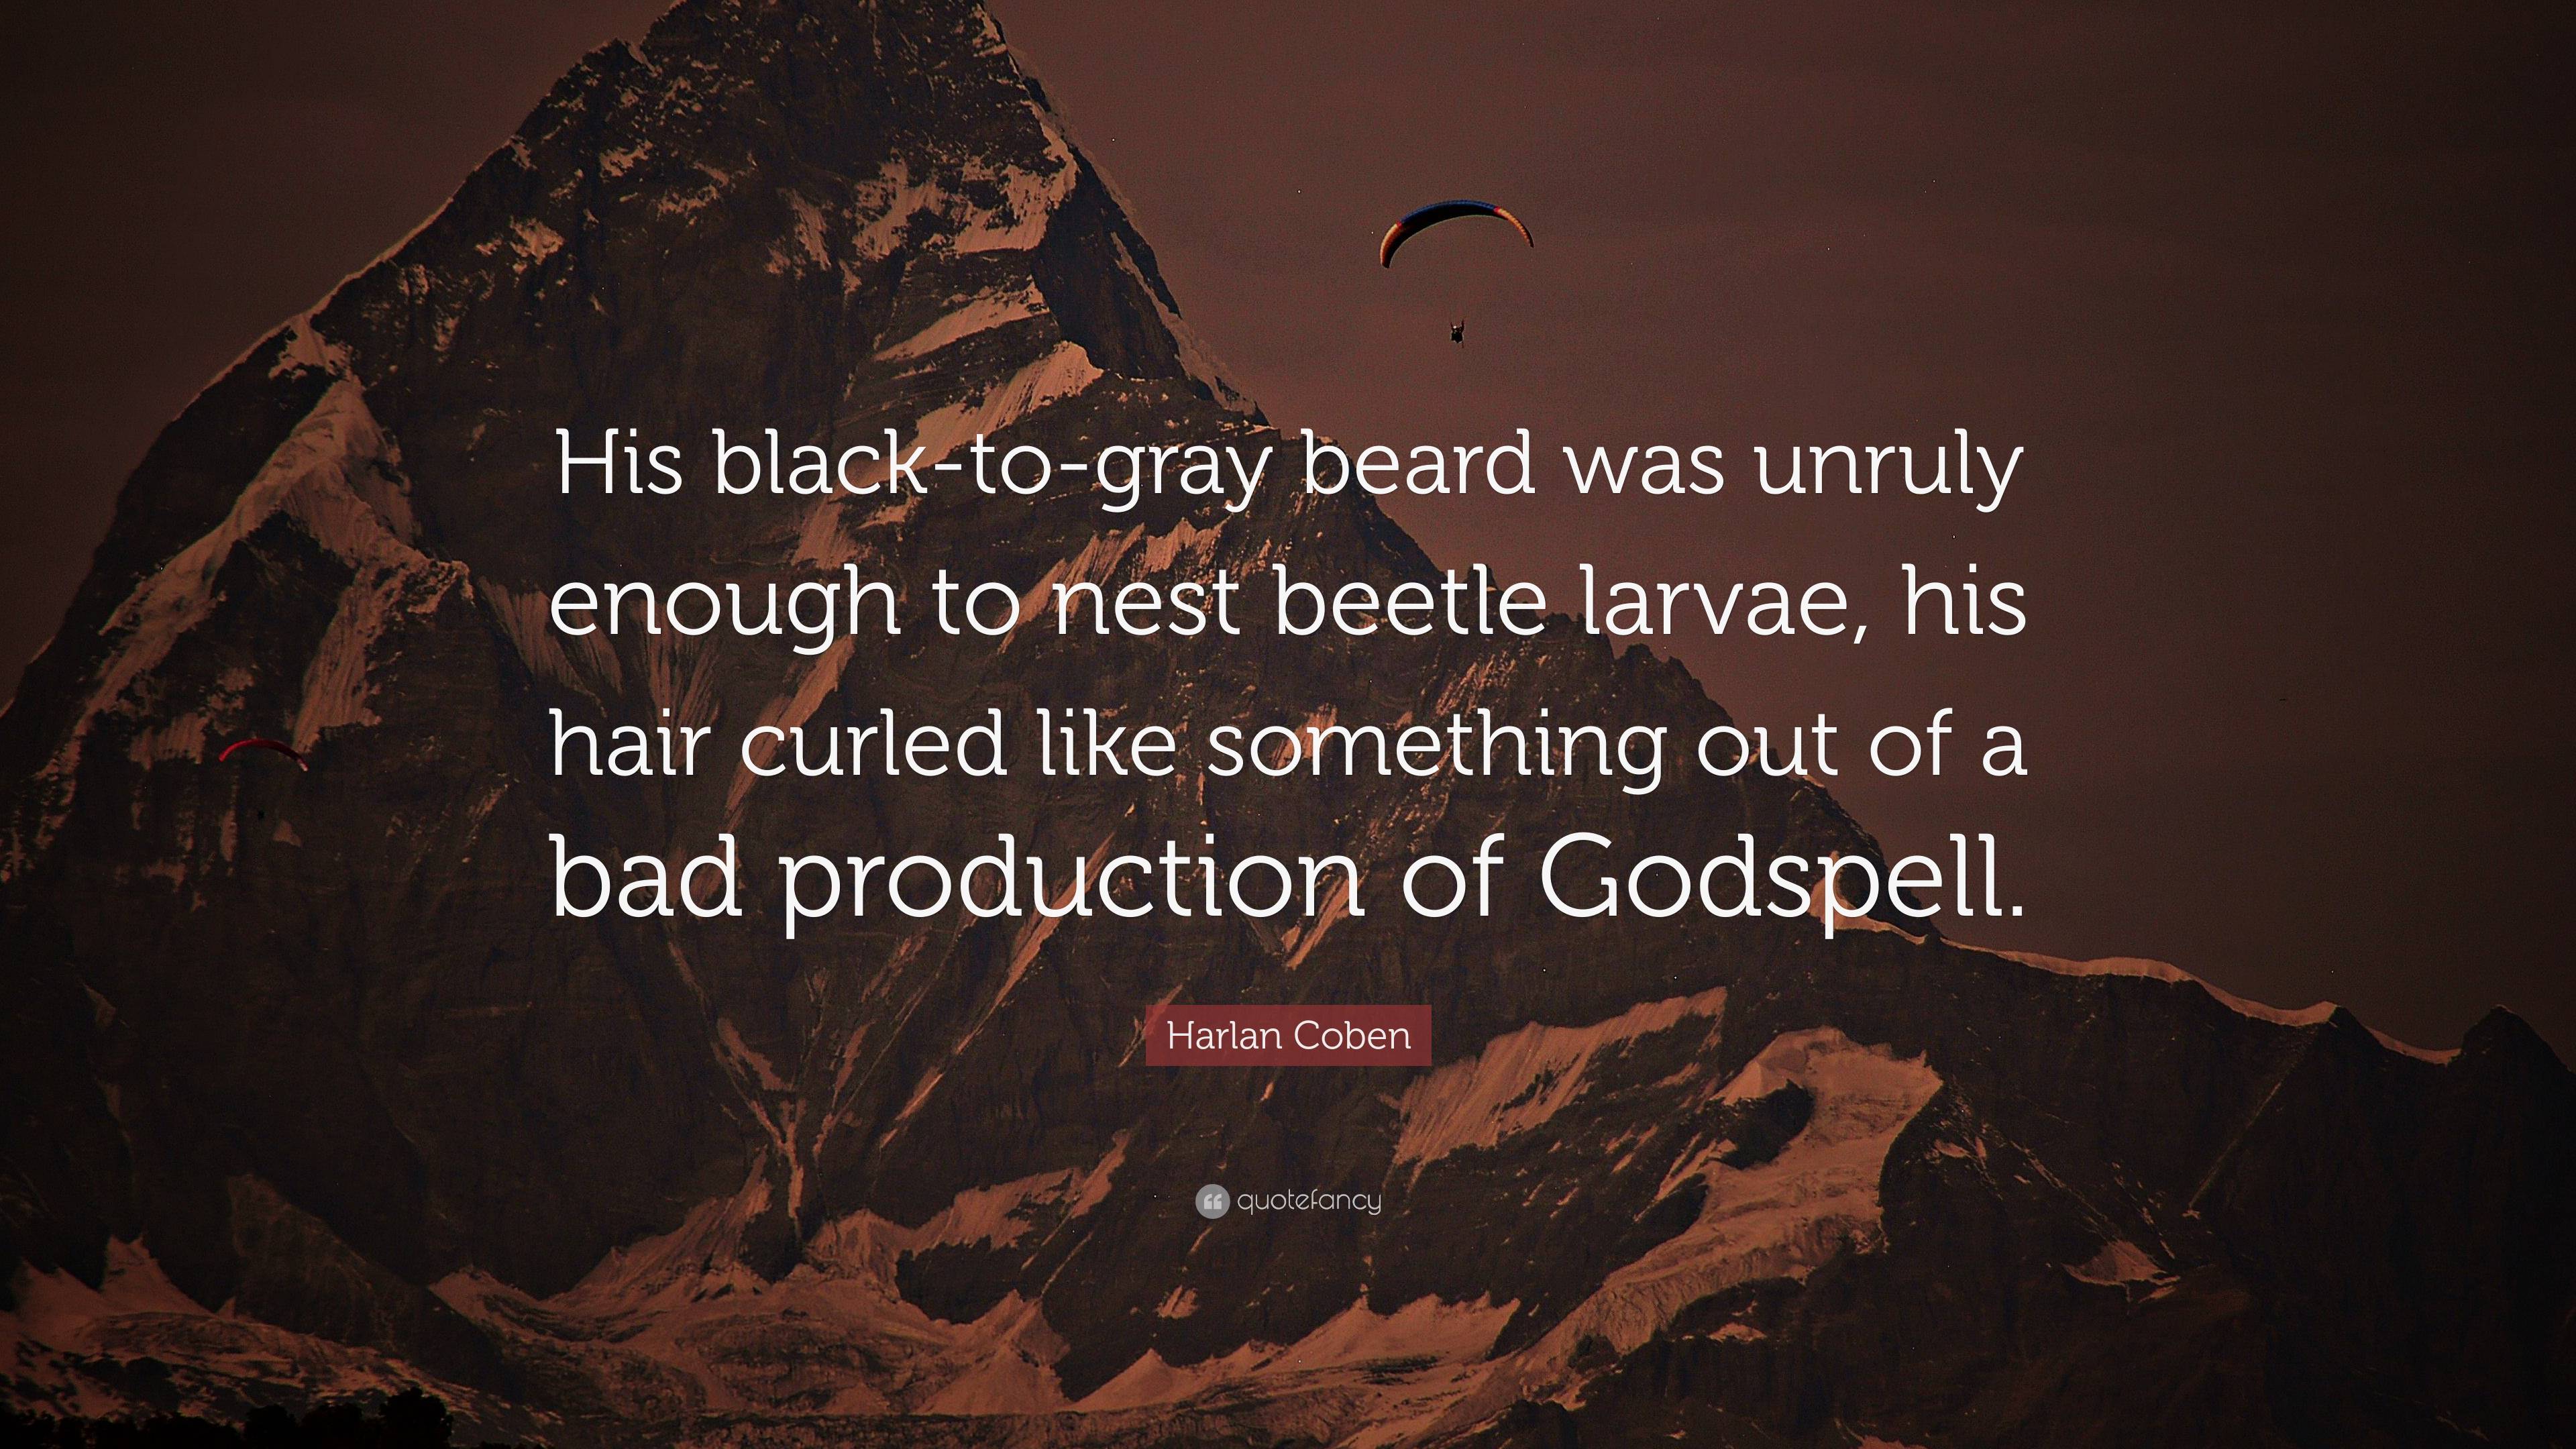 Harlan Coben Quote: “His black-to-gray beard was unruly enough to nest ...